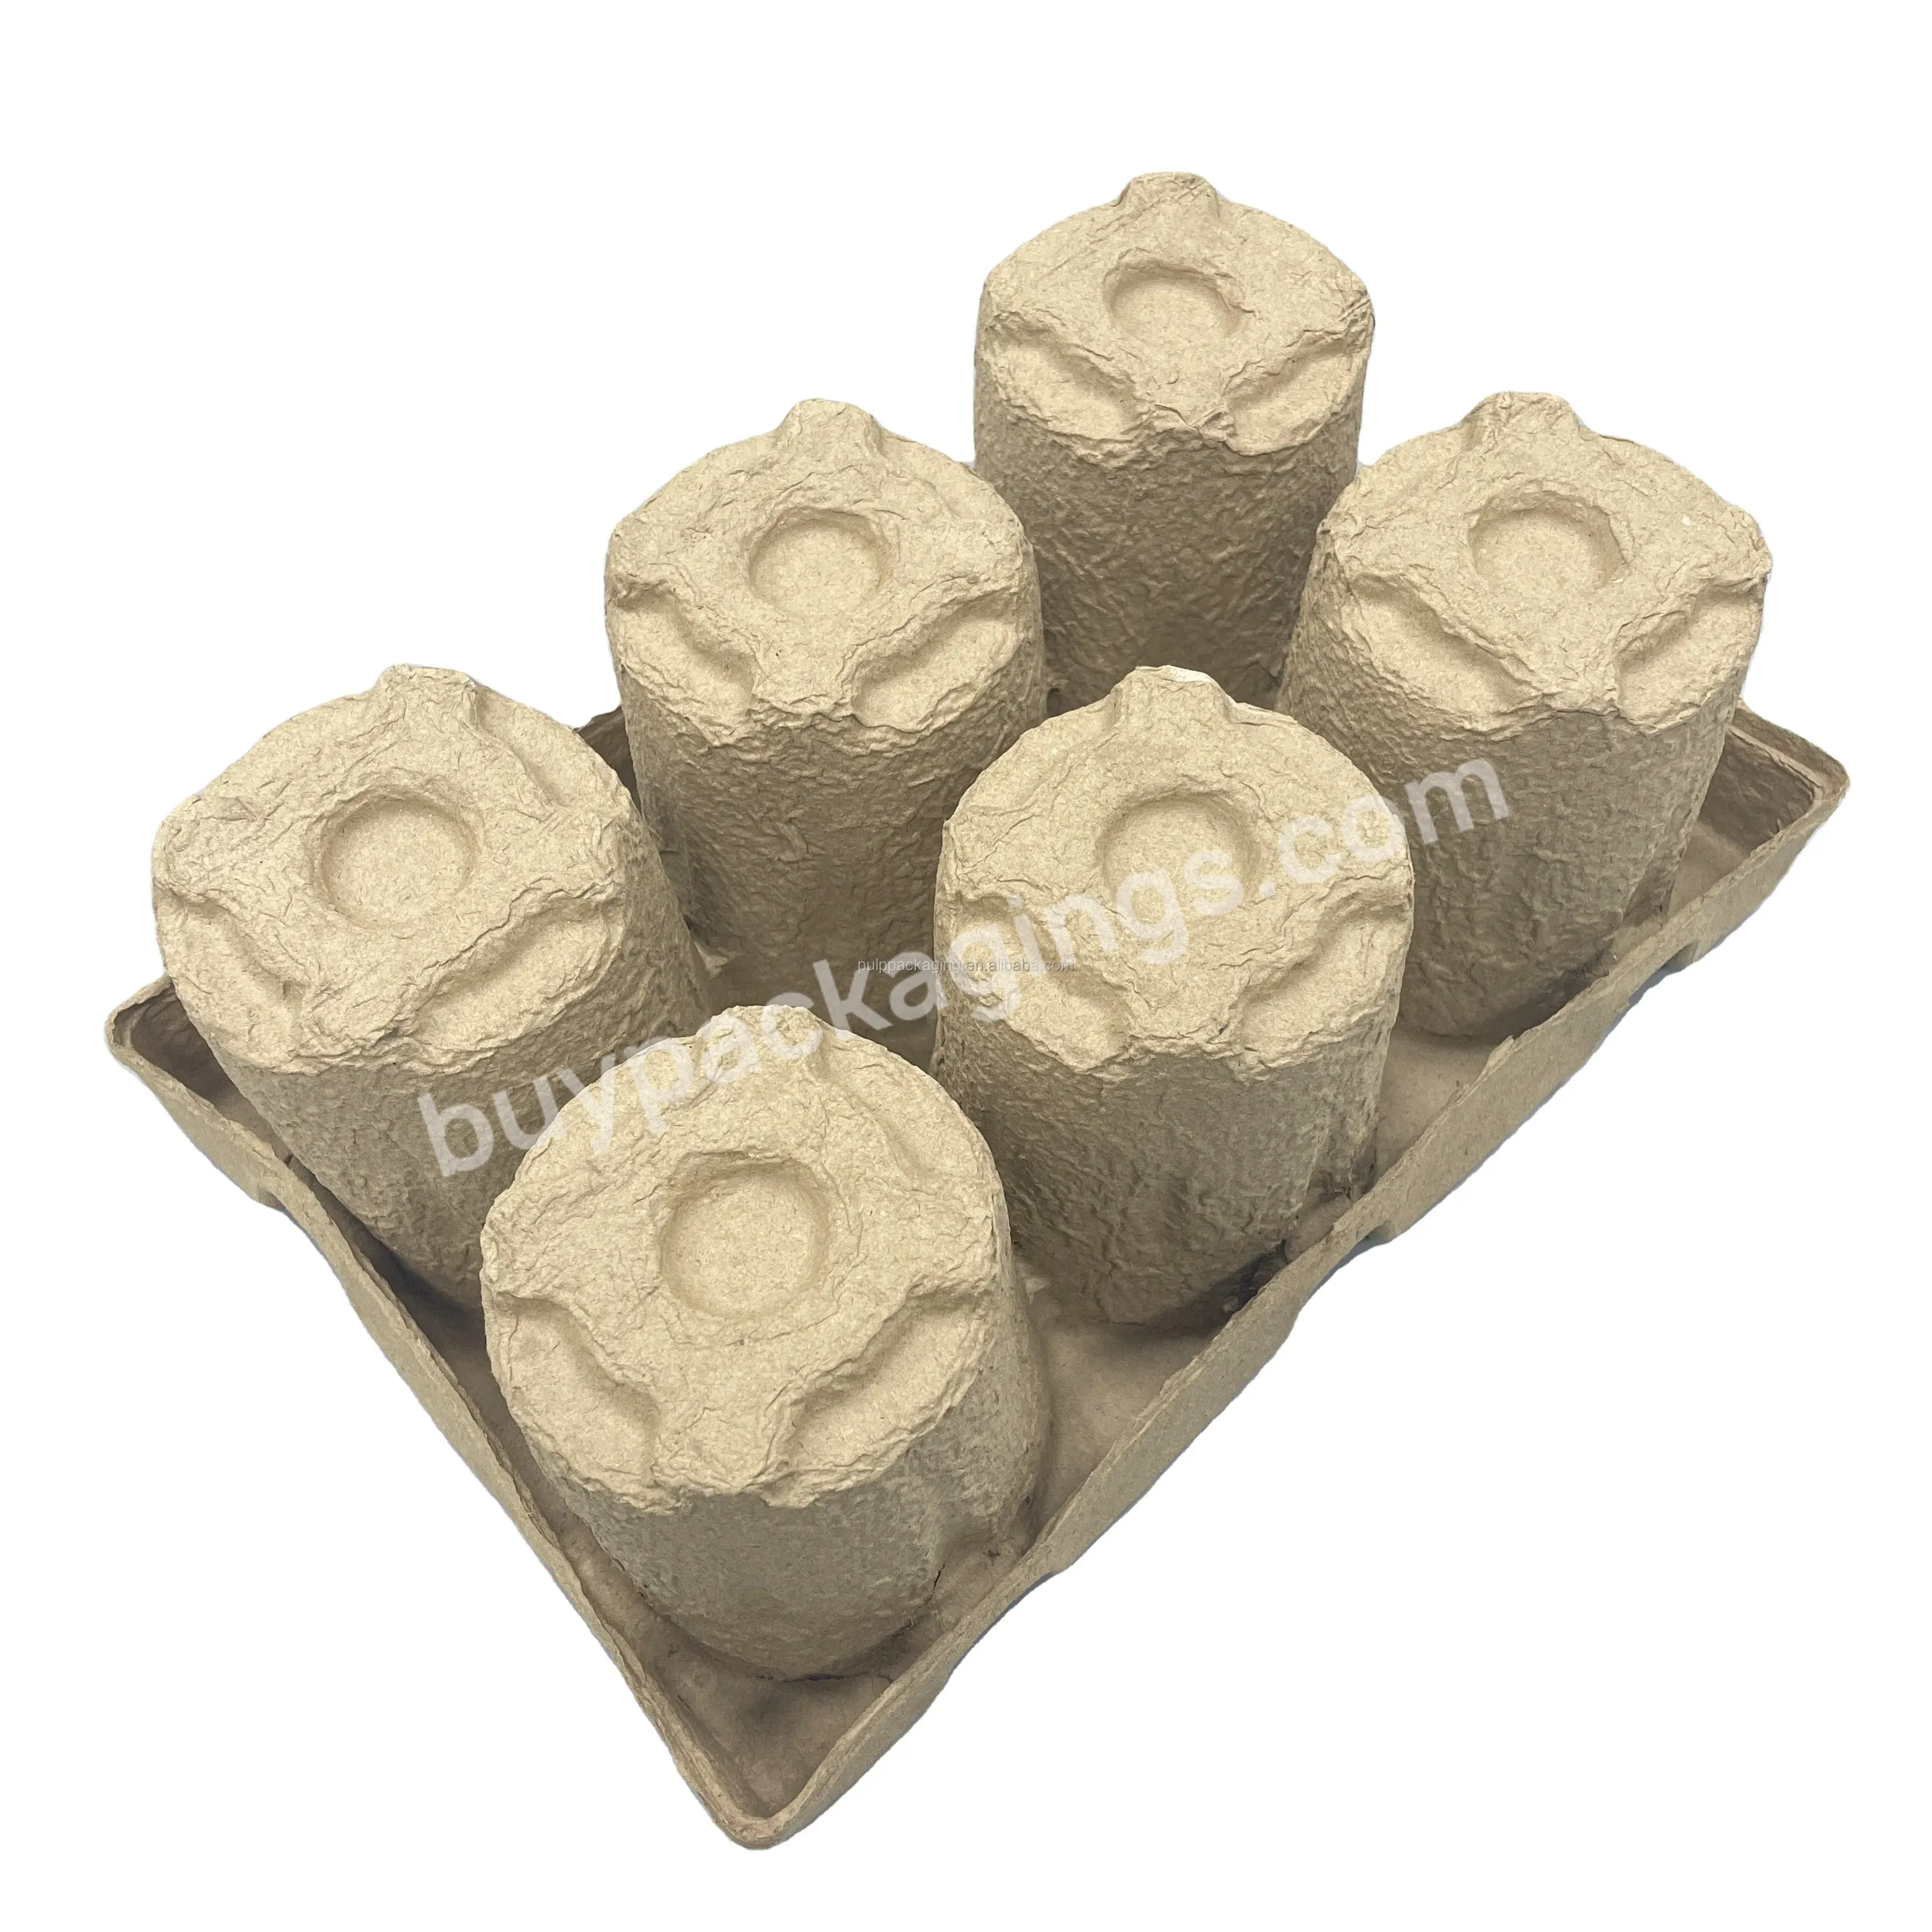 Candle Jar Packaging Recycled Paper Pulp Tray Mold Packing Dry Press Recycle Paper Pulp Pulp Insert